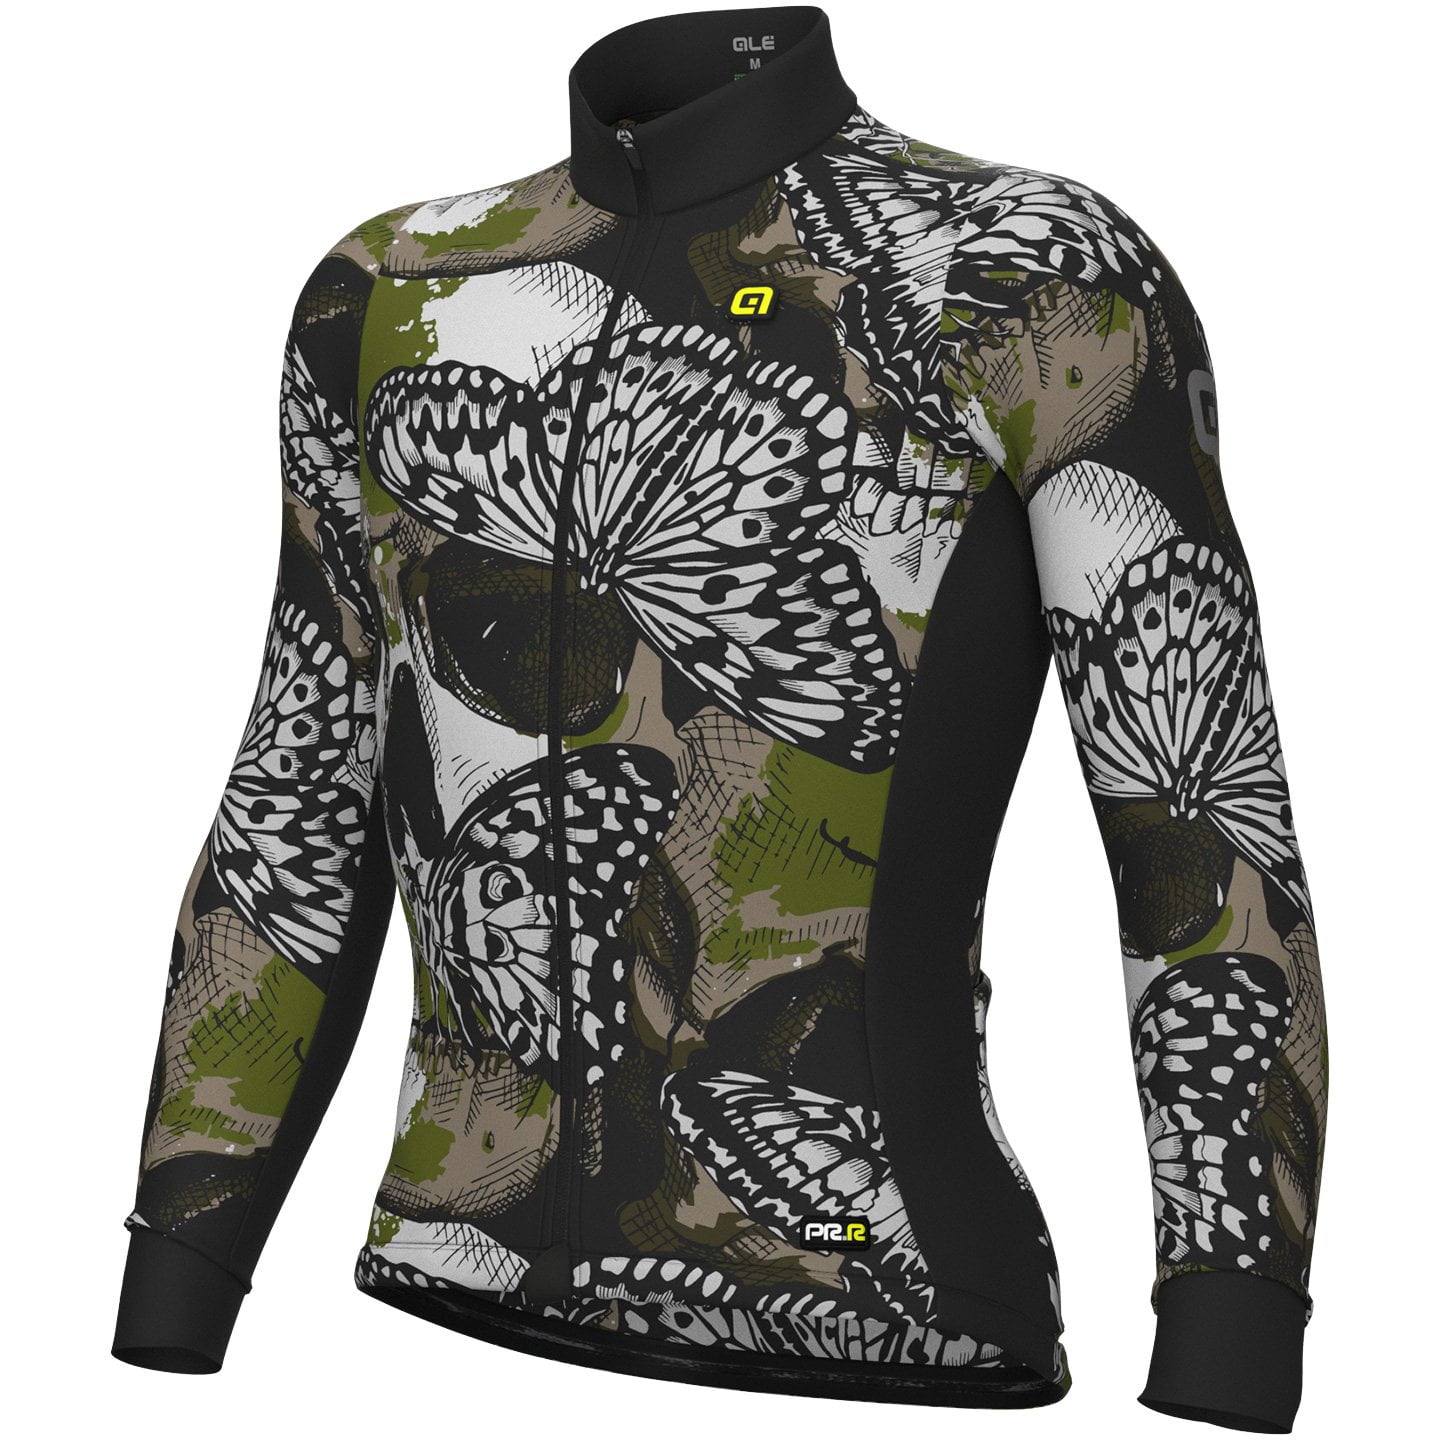 ALE Falena Long Sleeve Jersey Long Sleeve Jersey, for men, size 2XL, Cycling jersey, Cycle clothing